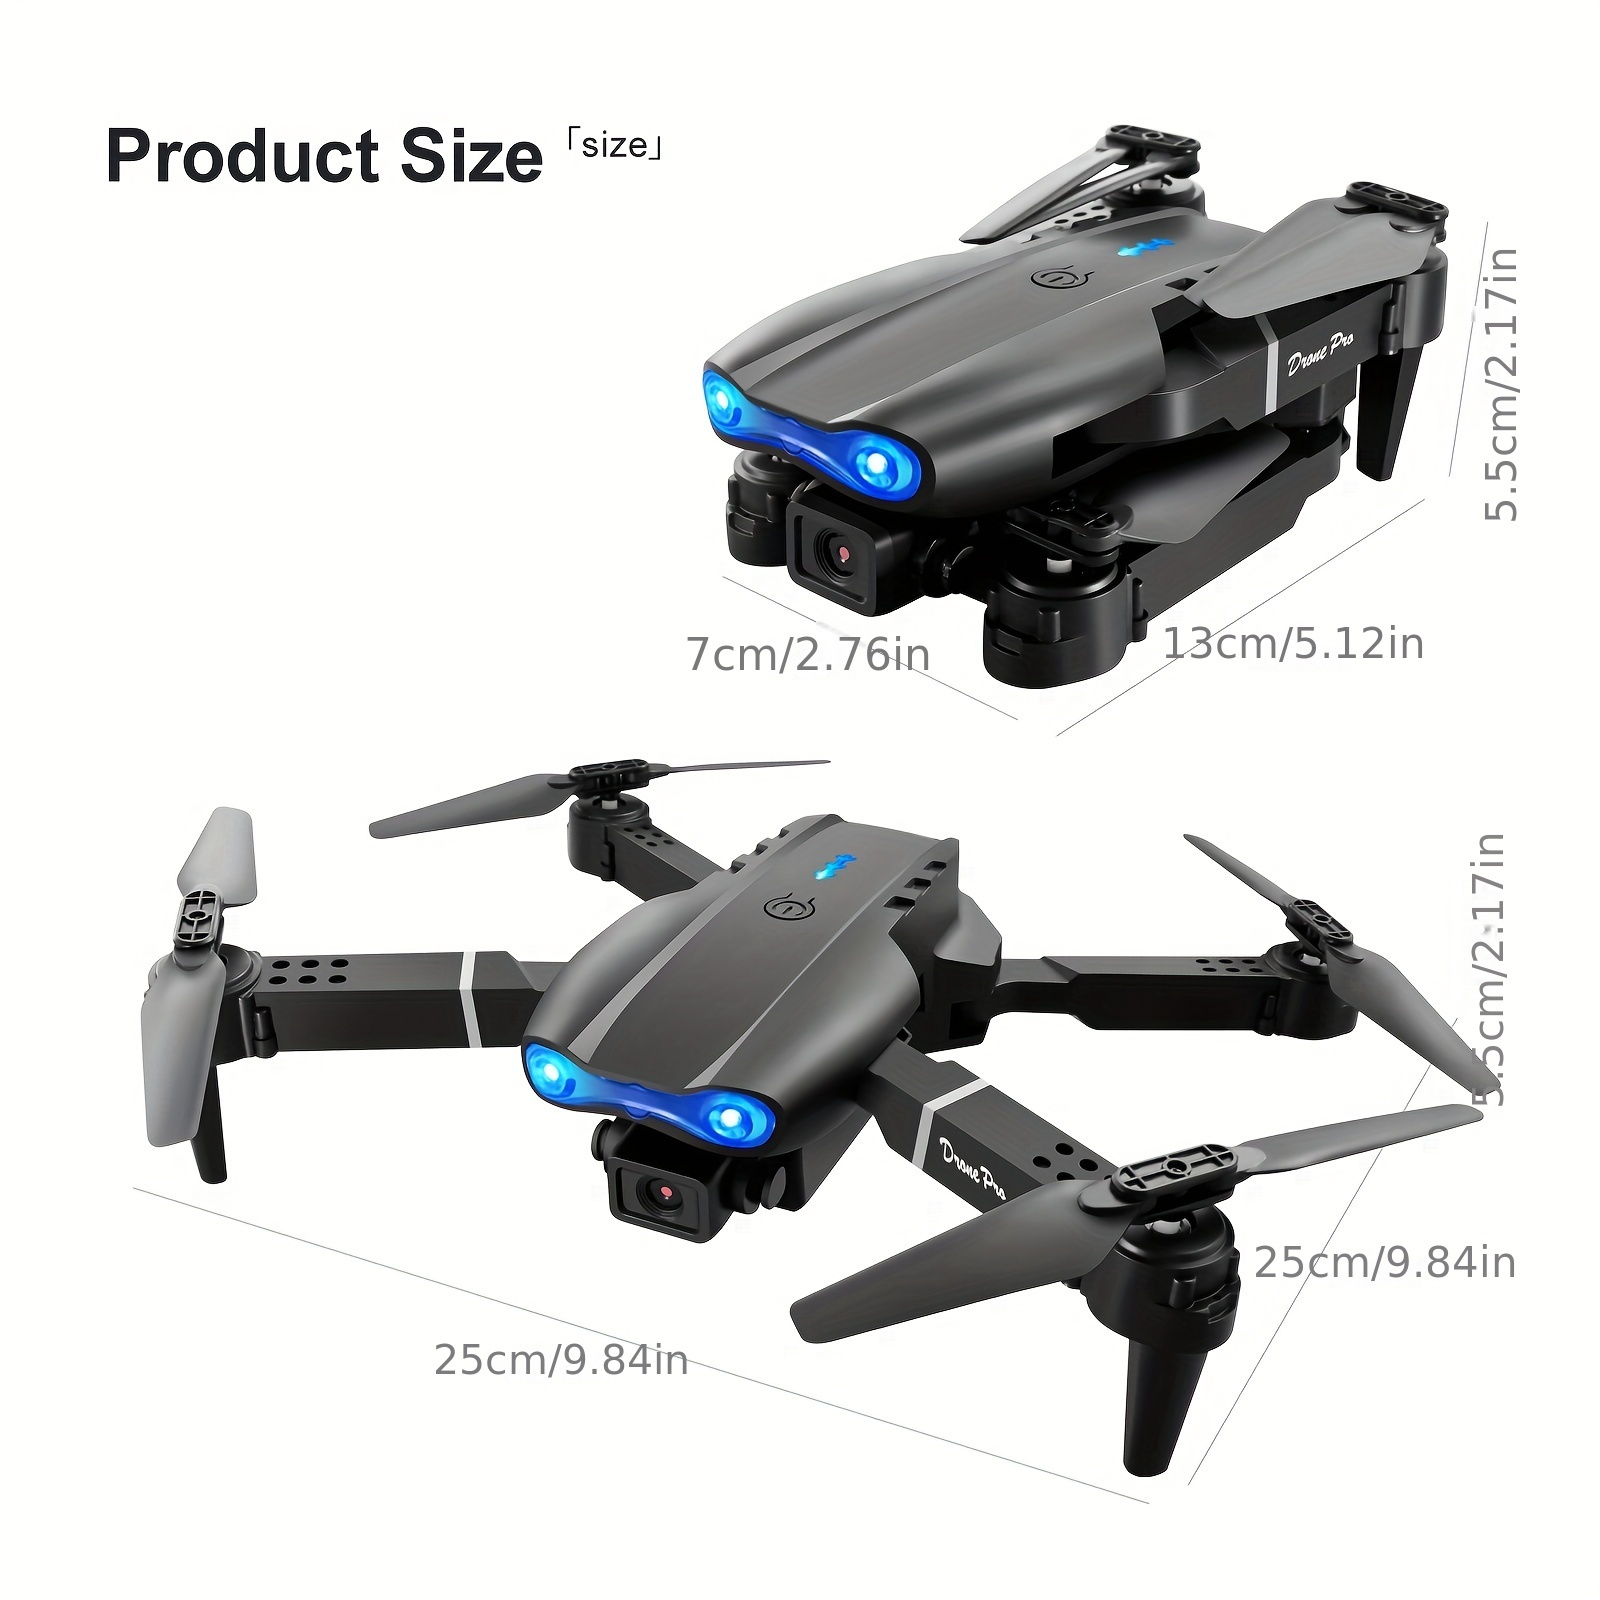 e99 folding aerial photography drone remote control quadcopter helicopter for beginners details 18